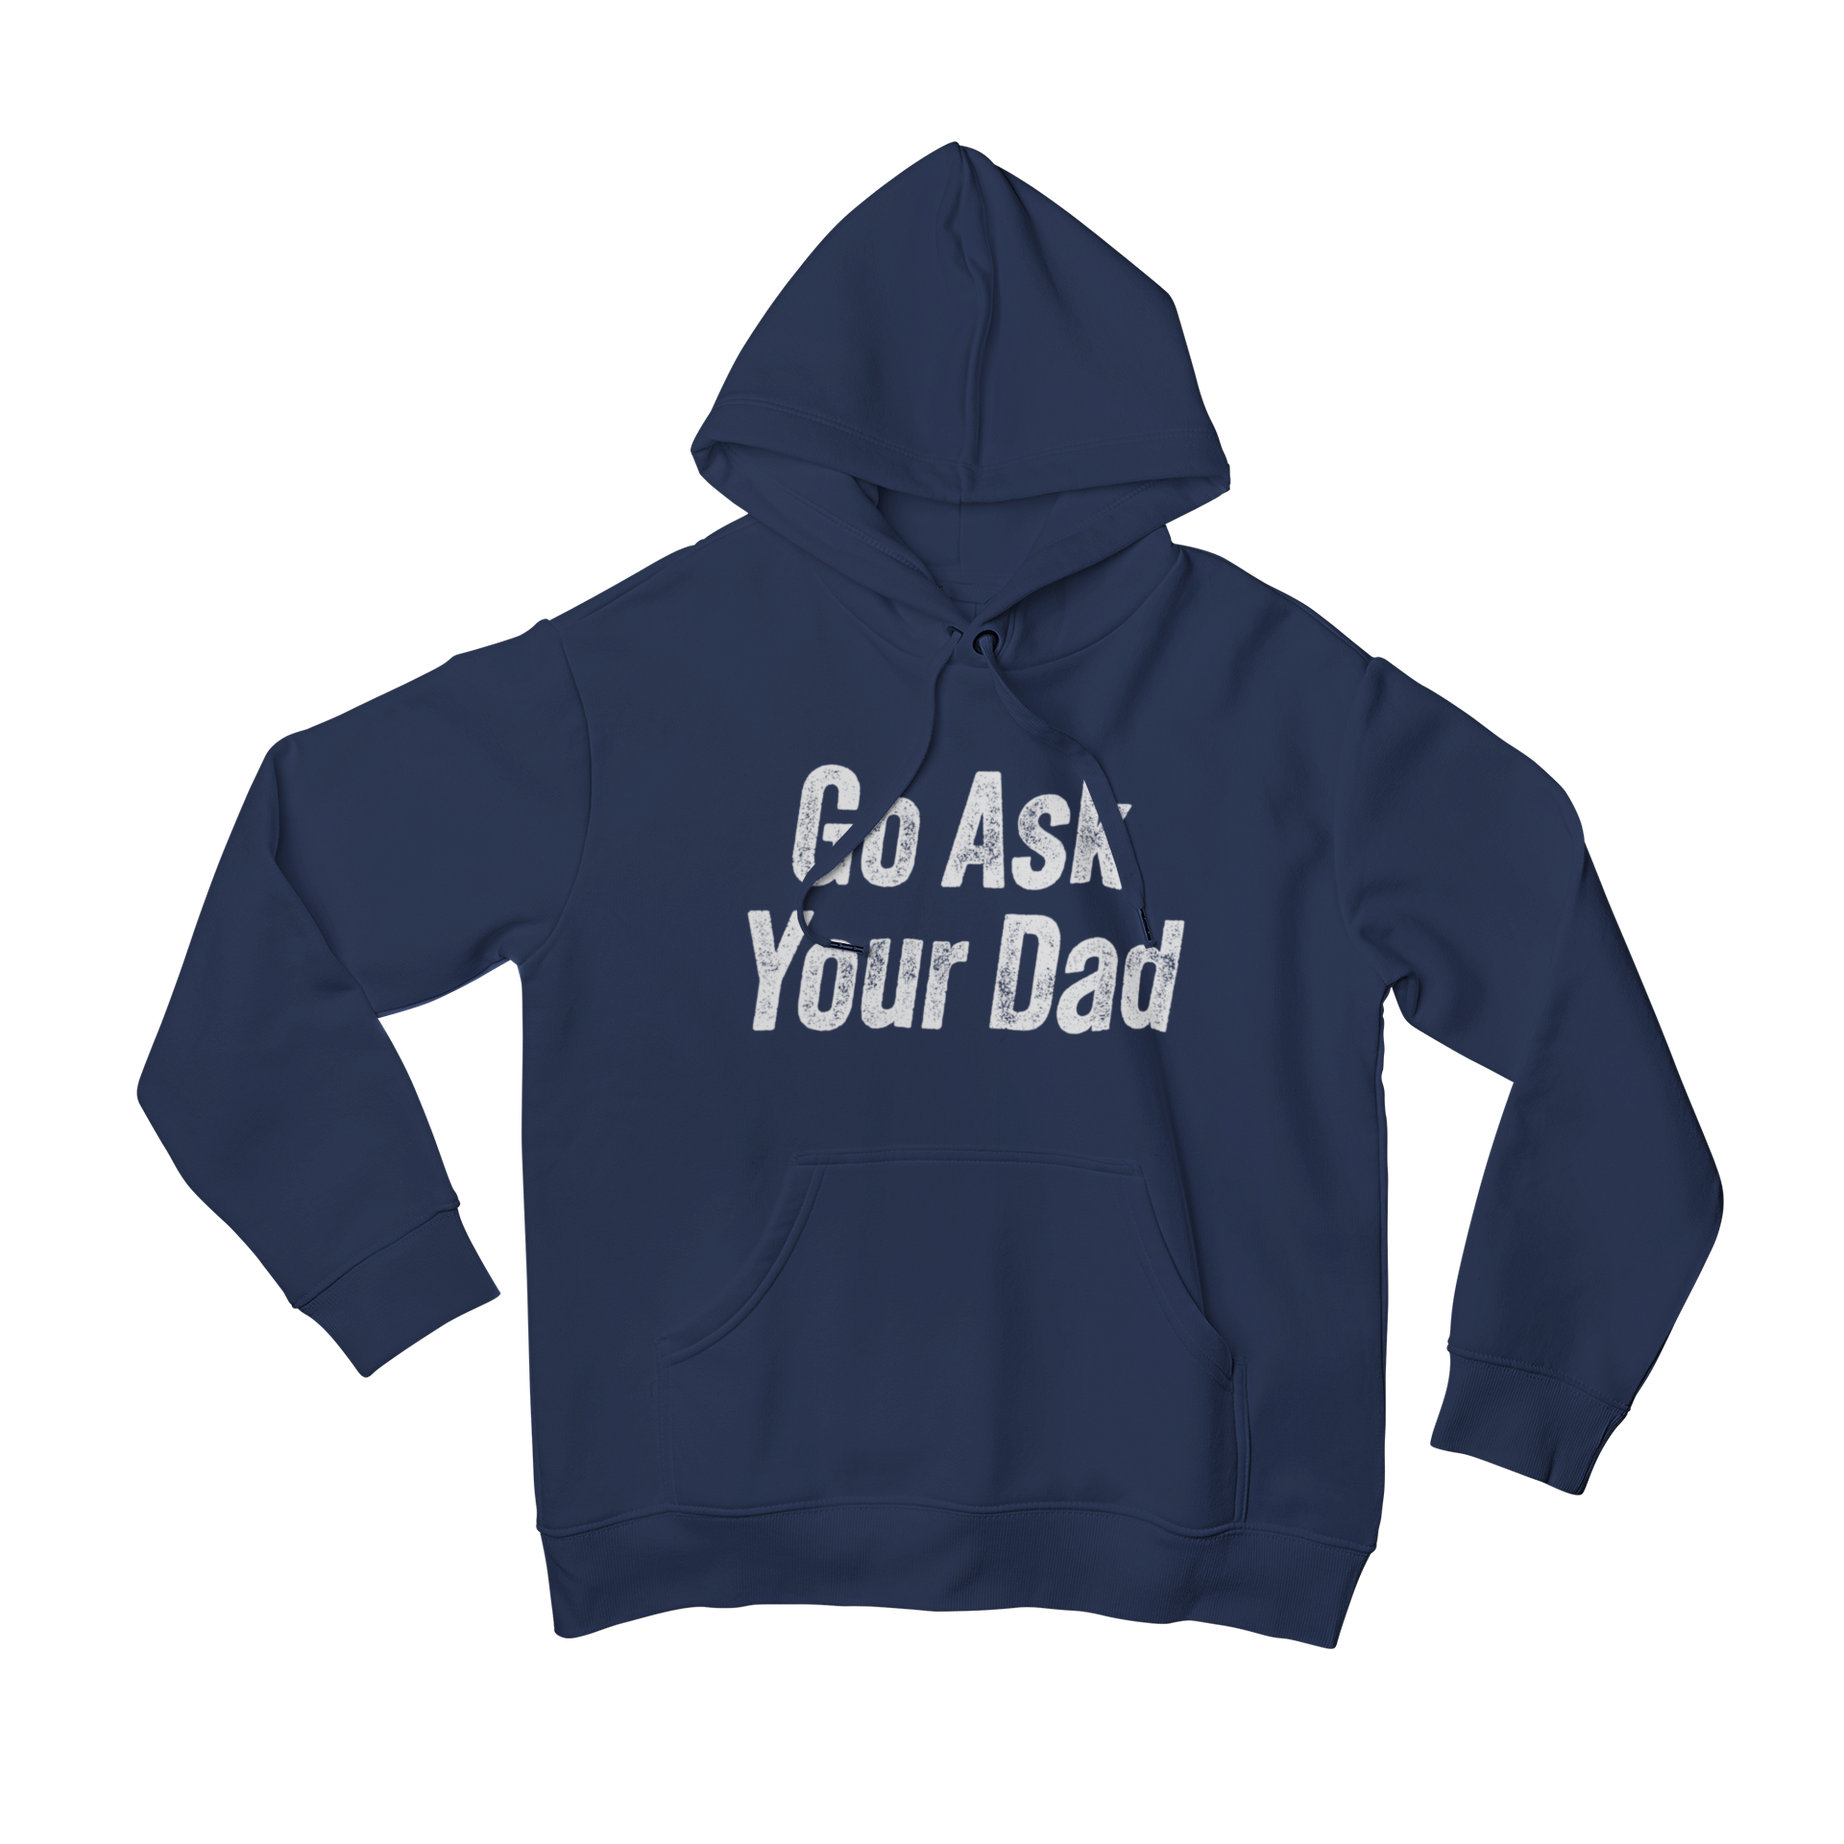 Complete your parenting team with our matching Ask Dad Hoodie, featuring the slogan "go ask your dad." Perfect for those moments when you need backup, this hoodie pairs perfectly with our Ask Mum Hoodie for a unified look. Expertly crafted with comfort and style in mind.